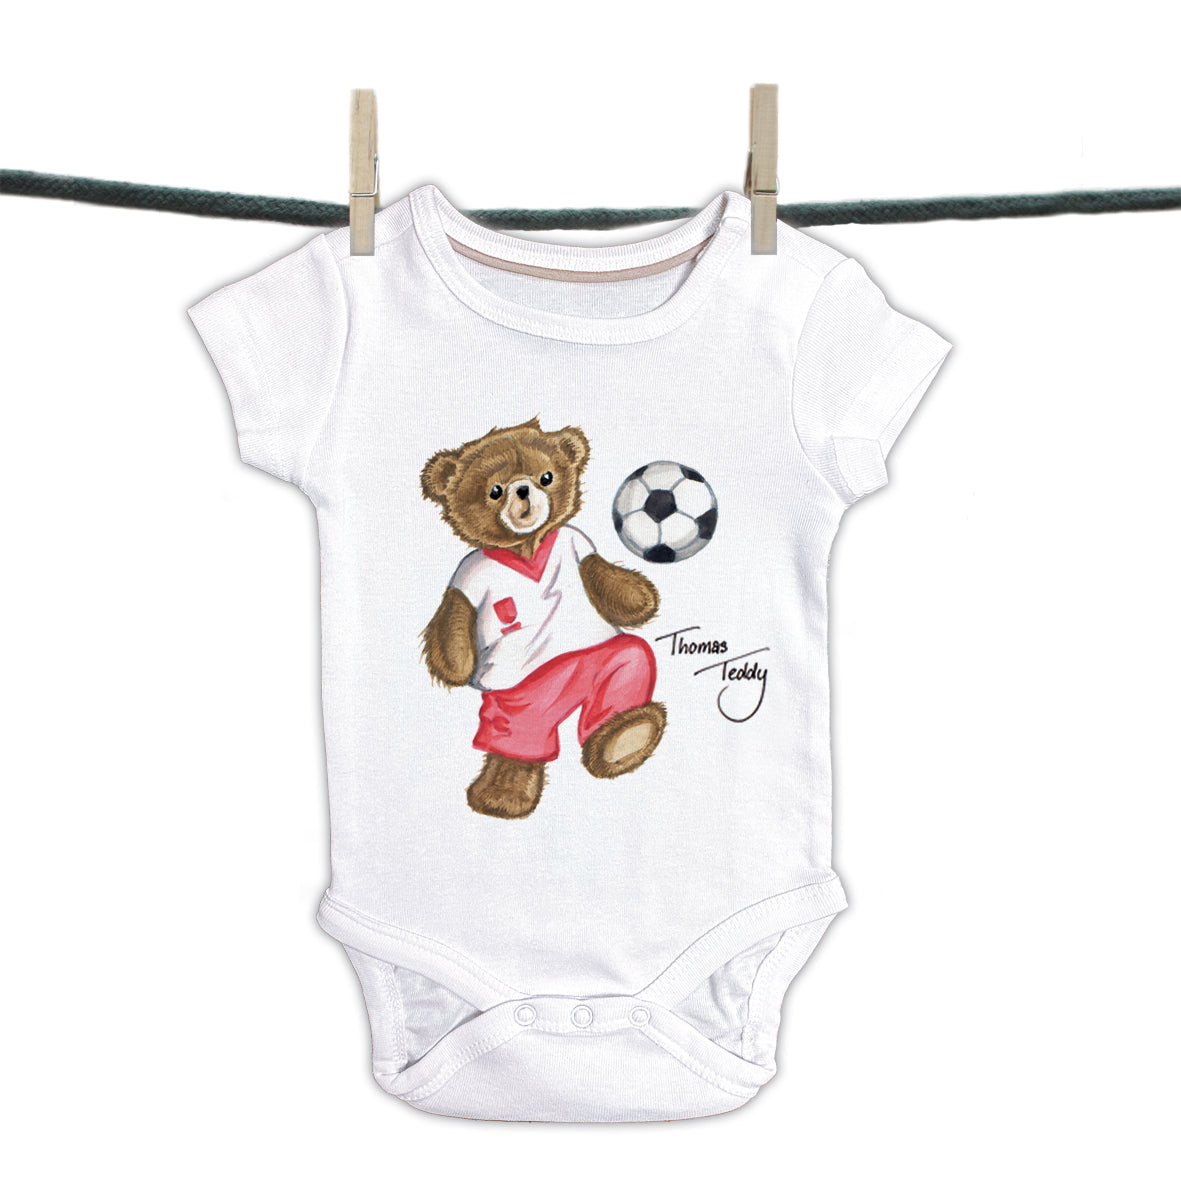 Baby romper Thomas Teddy collection - Soccer Bear